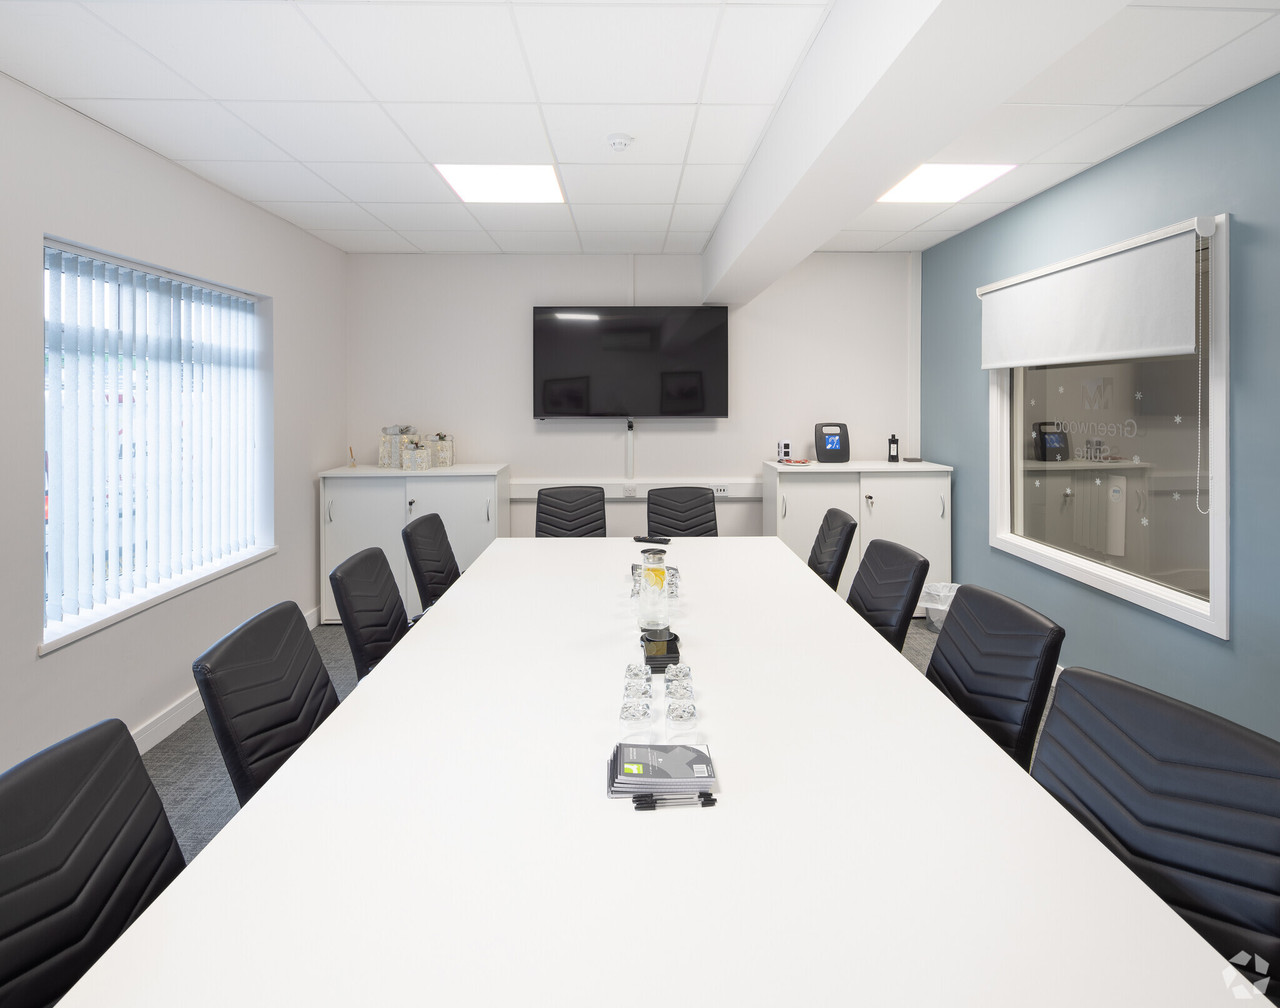 Greenwood Suite - Superior Meeting Spaces in Grimsby, North East Lincolnshire